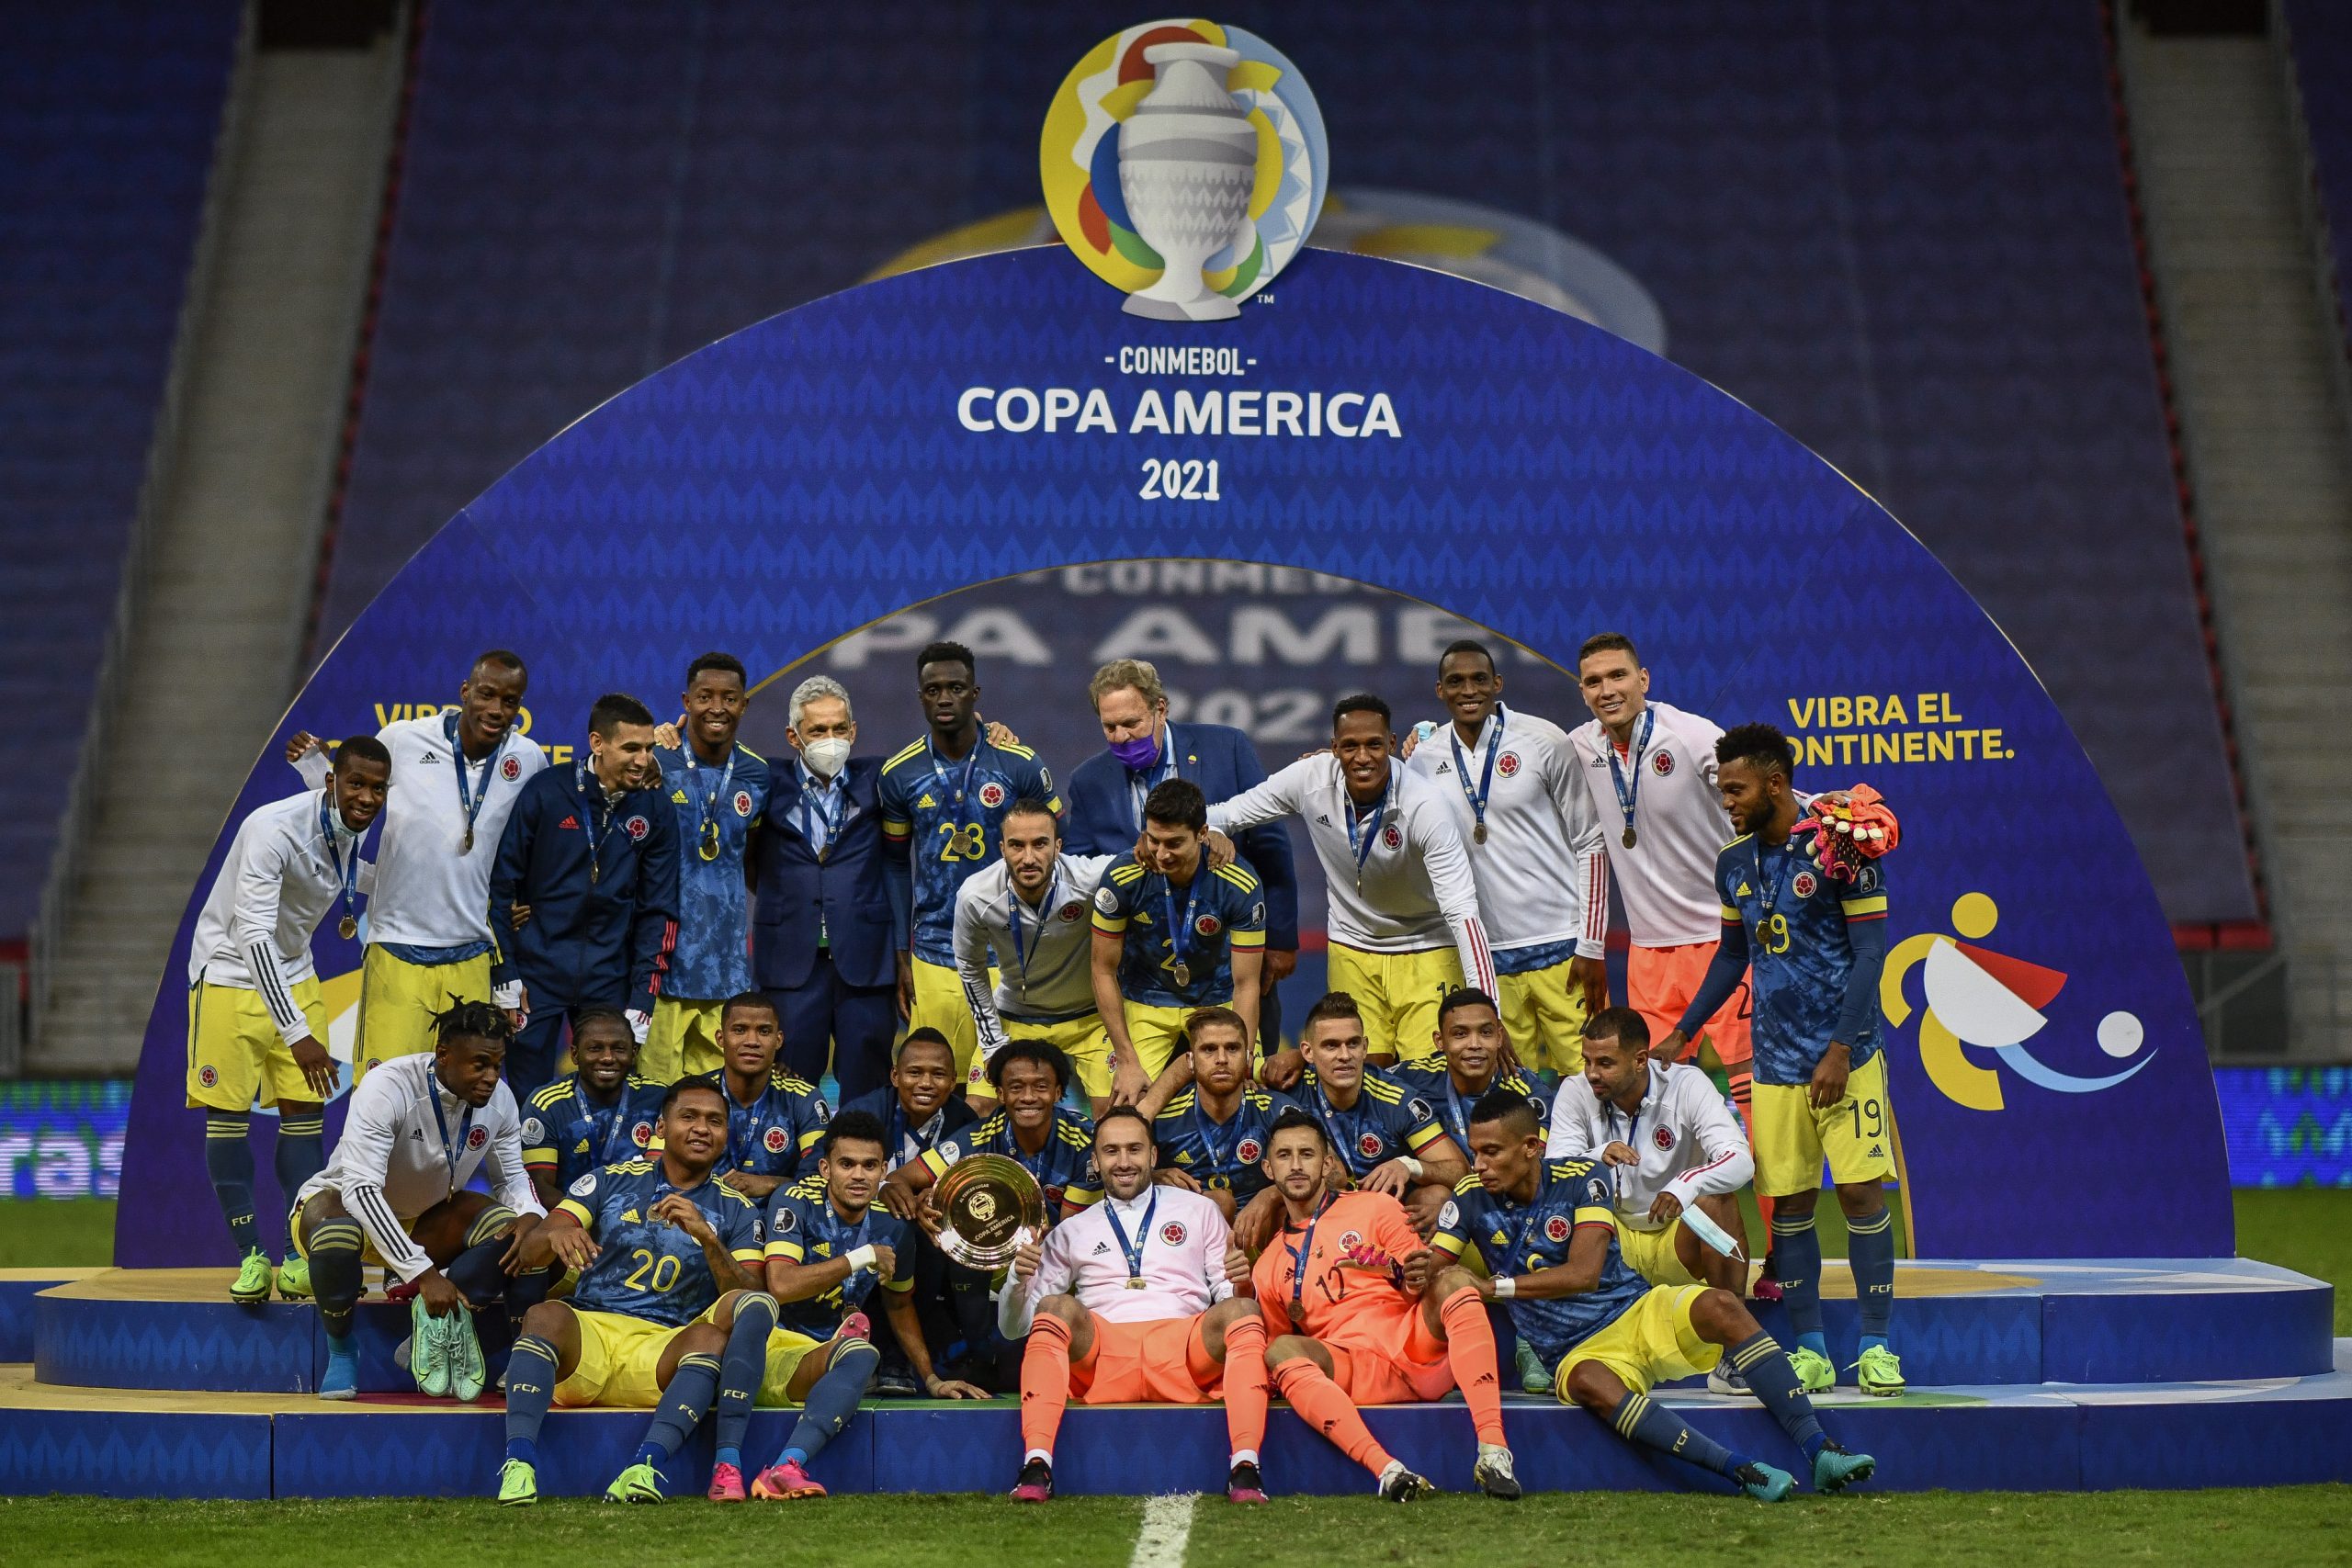 DF - Brasilia - 07/09/2021 - CUP AMERICA 2021, THIRD PLACE, COLOMBIA X PERU - Colombian players pose for photos during the third place awards ceremony after victory over Peru in a match against at Mane Garrincha stadium for the championship decision Copa America 2021. Photo: Mateus Bonomi/AGIF (via AP)